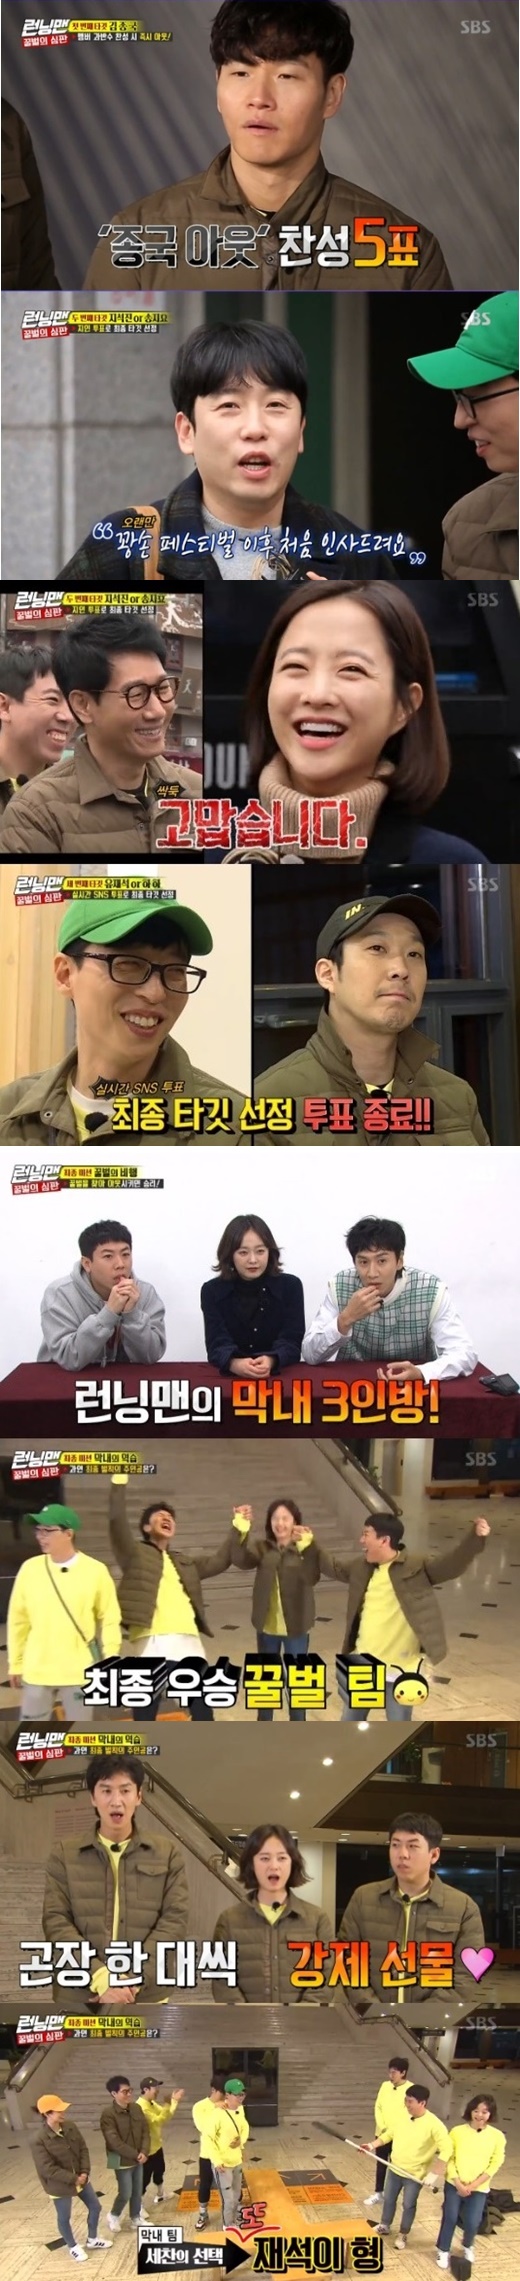 SBS Running Man took the top spot in the same time zone of 2049 ratings.According to Nielsen Korea, the ratings agency Running Man, which aired on the 3rd, recorded a 4 percent of 2049 target ratings (based on the second part of the audience rating of Seoul Capital Area households), which is an important indicator of major advertising officials, and ranked first among the entertainment programs of the same time zone, beating Happy Sunday and Masked Wang.The average audience rating was 5.1% in the first part and 6.7% in the second part (based on the audience rating of Seoul Capital Area households), and the highest audience rating per minute rose to 7.6%.The broadcast was decorated with a bee referee race that did not know what it was, and attracted attention.The first singer Kim Jong-kook was put on the bench, and the In-N-Out Burger vote resulted in five votes in favor and two votes in opposition.Kim Jong-kook was absurd about the results of the vote, but the members laughed at each other pretending not to be themselves.Song Ji-hyo and Ji Suk-jin were put on the bench, and actors Park Bo-young, comedian Nam Chang-hee and Empire appeared as entertainer judges.In particular, Park Bo-young revealed his face to the public with an accidental surprise appearance, but he showed his humiliation-free beauty and made everyone feel better.Park Bo-young chose Ji Suk-jin as the person to make In-N-Out Burger with Nam Chang-hee and Emperor, saying, Song Ji-hyo is like a sister, and Ji Suk-jin is just a king-knock.The member who was decided to be the final target through real-time SNS voting among Haha and Yoo Jae-Suk was Yoo Jae-Suk.The members were given a race to catch the bees, and in the process, they removed the fake bee Yoo Jae-Suk.The 15 Minute Race began, and the Bee Yang Se-chan was eliminated, and the members found out the identity of the Bee was the youngest line trio.Kim Jong-kook, Song Ji-hyo and Haha struggled, but Lee Kwang-soo kept the young team victory and pointed out Yoo Jae-Suk as a penalty member.Yoo Jae-Suk was baptized with a prickly plight; the scene had a top-rated 7.6% per minute, taking the best one minute.